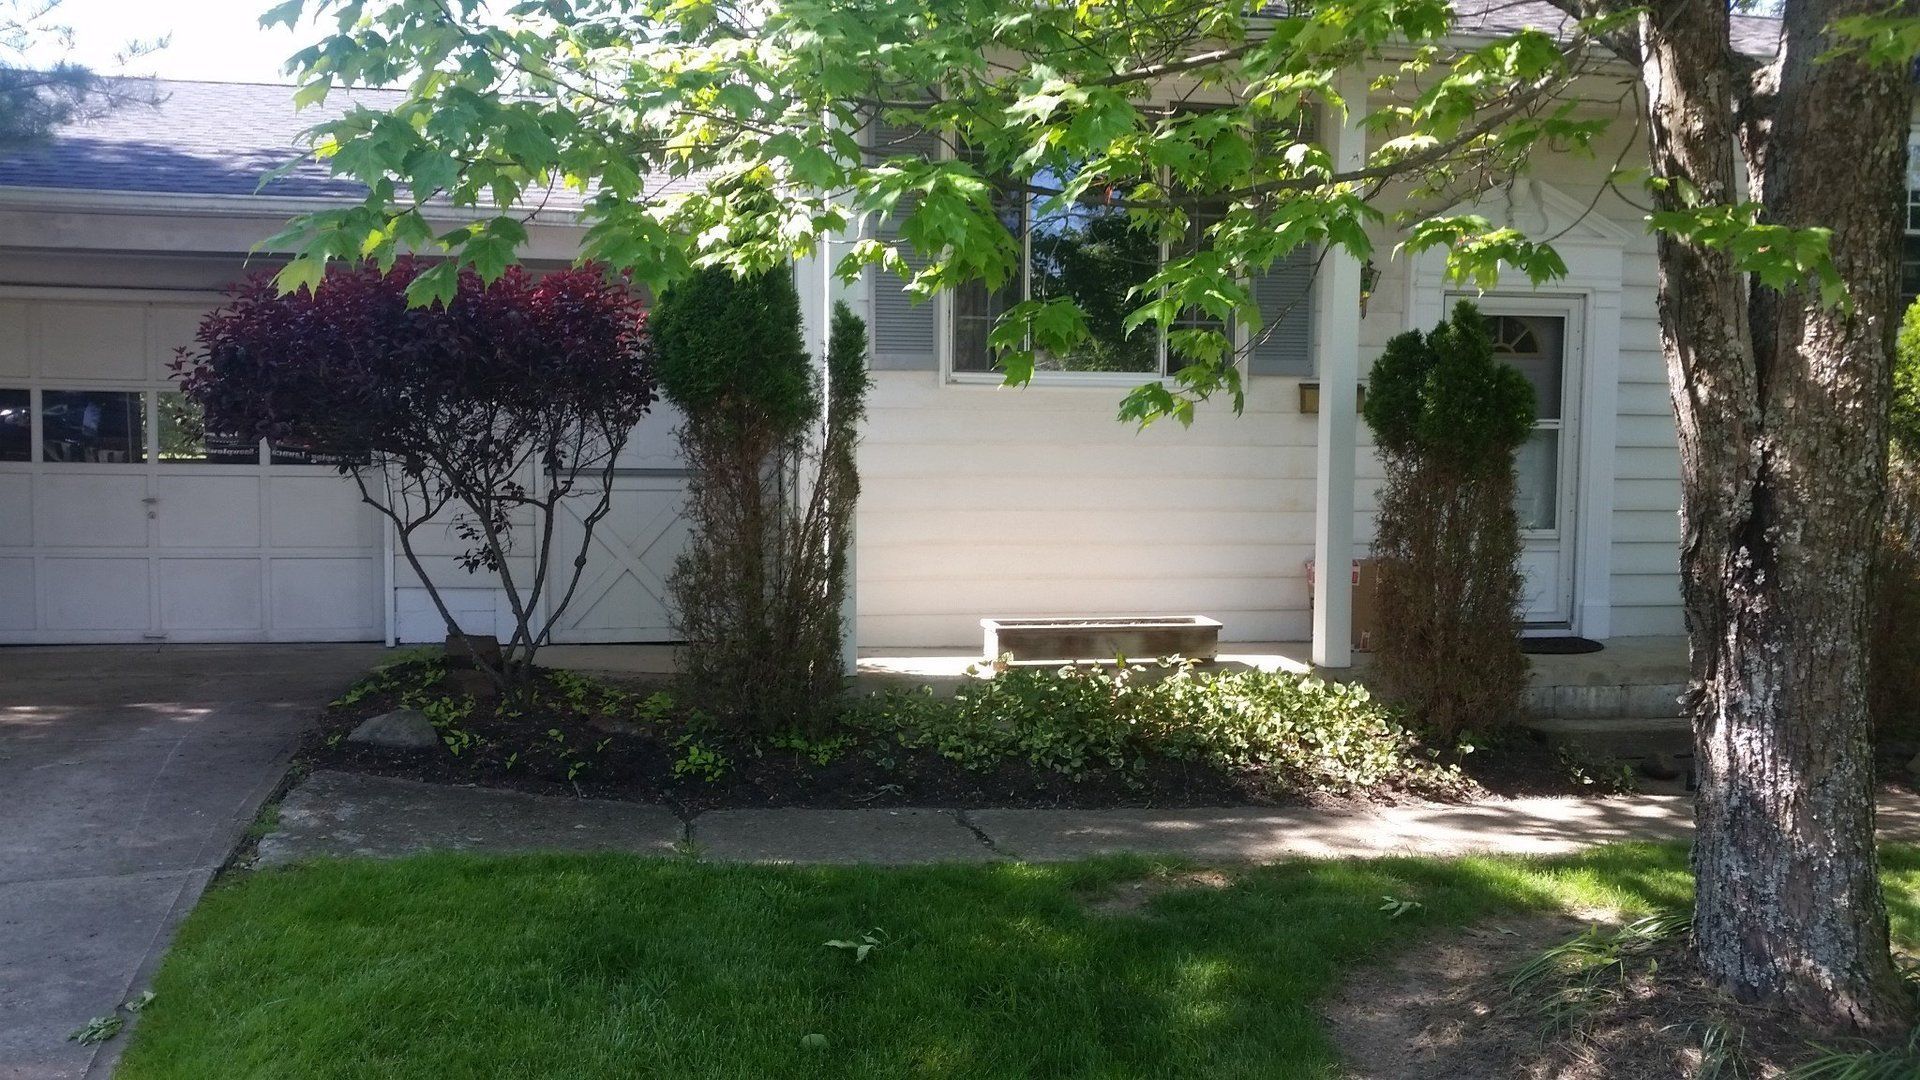 overgrown shrubs in front of house